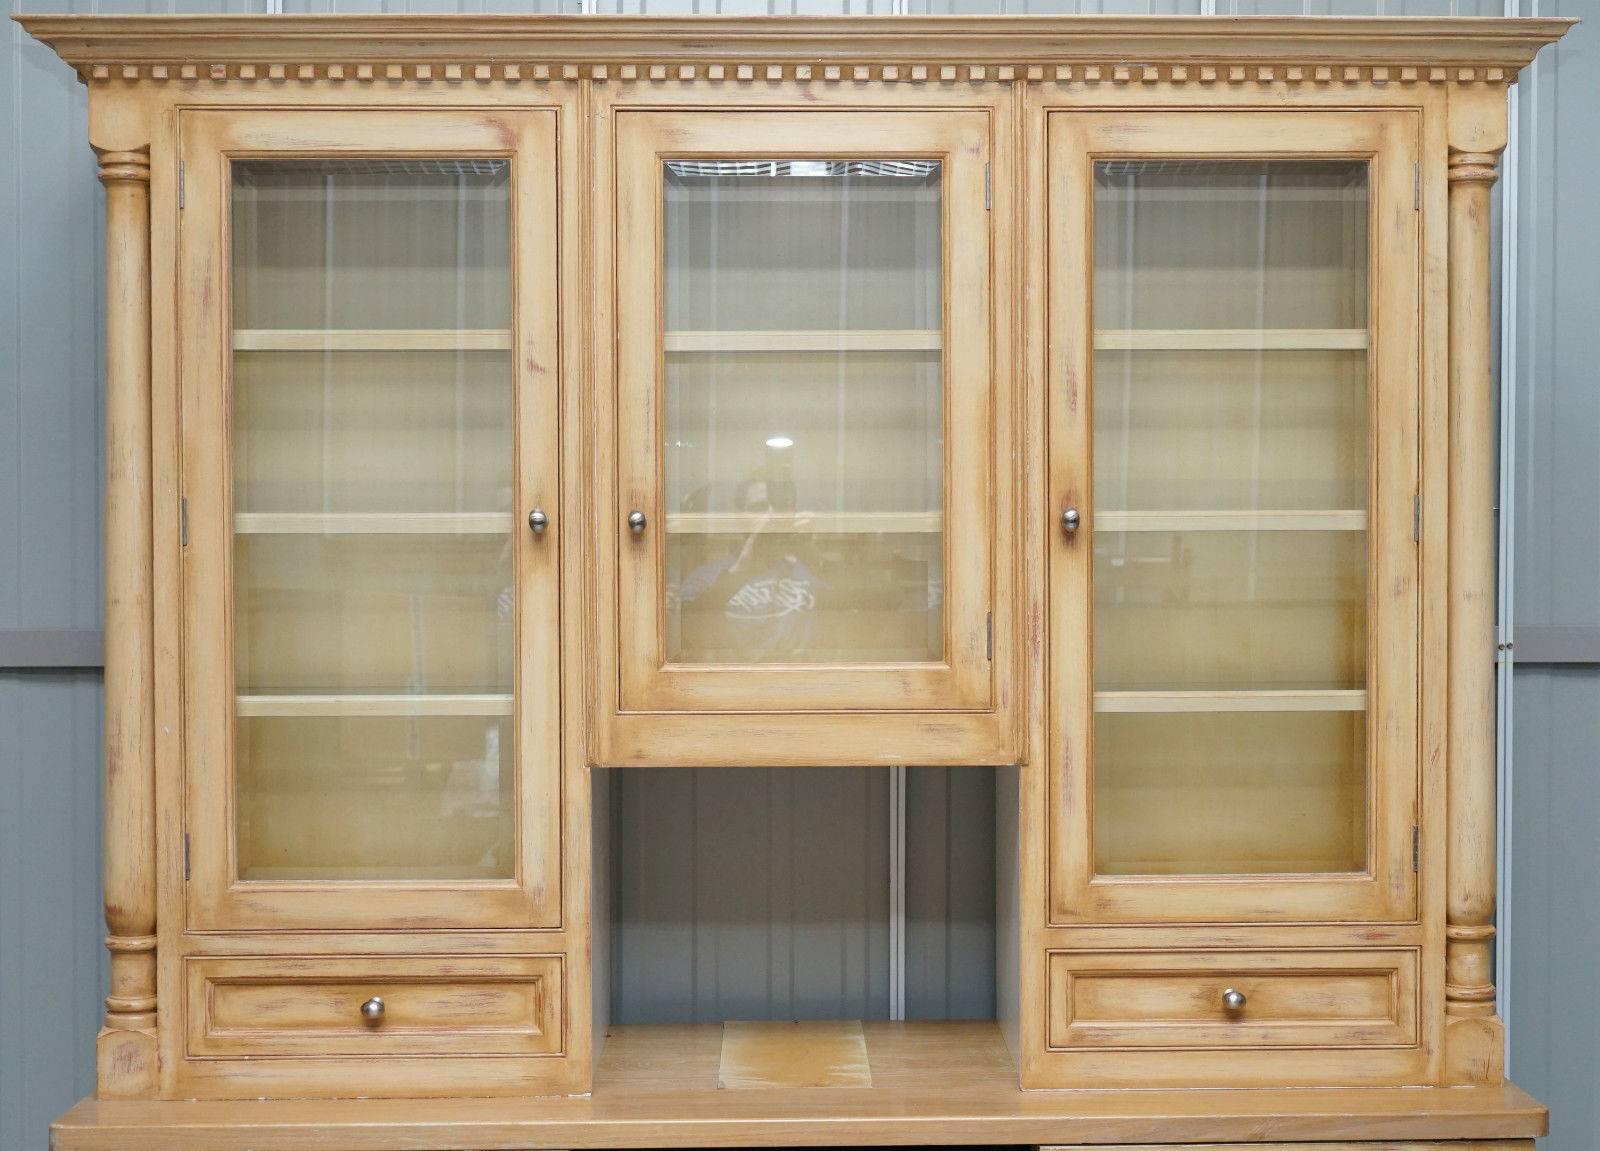 Antique & Vintage furniture Wimbledon 07850 890032

We are delighted to offer for sale this very rare panelled solid English vintage oak kitchen cupboard welsh dresser with built in wine cooler fridge

This piece is very large and substantial,